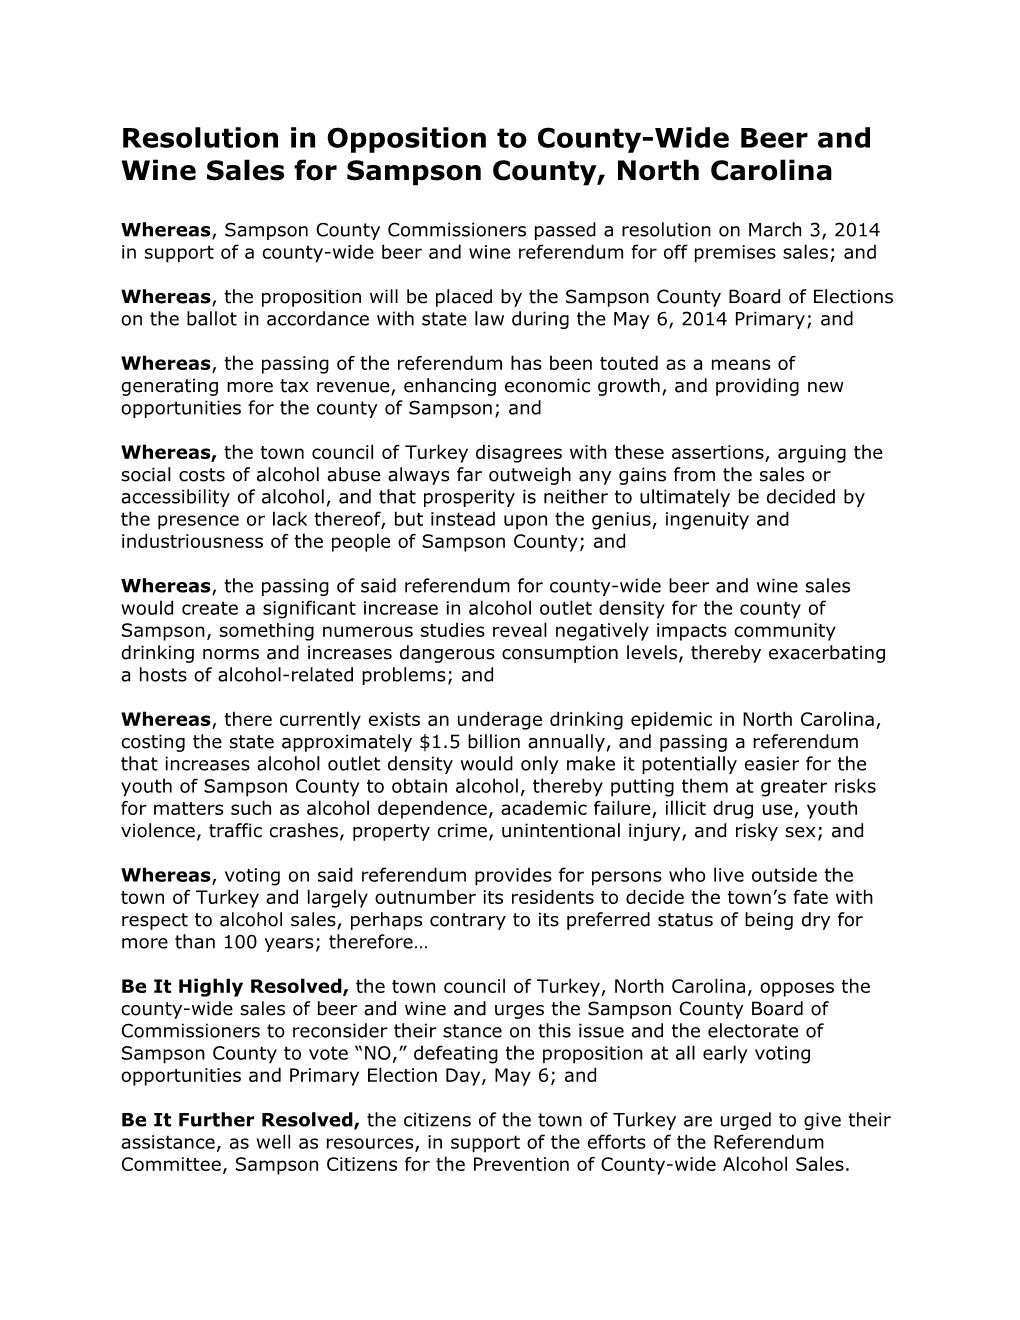 Resolution in Opposition to County-Wide Beer and Wine Sales for Sampson County, North Carolina